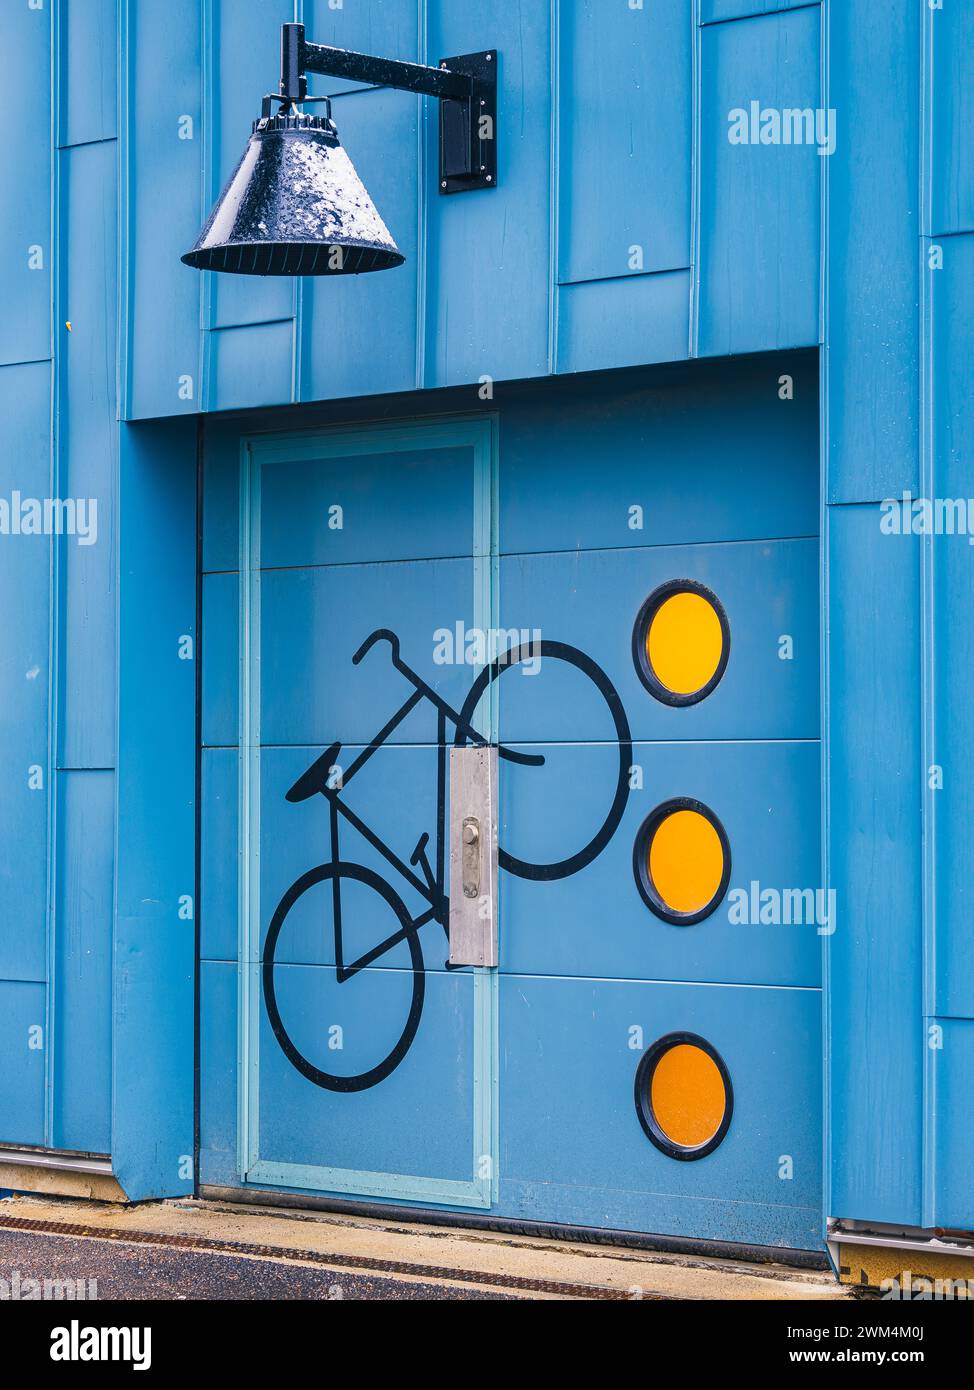 A striking blue door features a painted bicycle icon, complemented by three bright yellow circles, representing a bike-friendly facility in Gothenburg Stock Photo